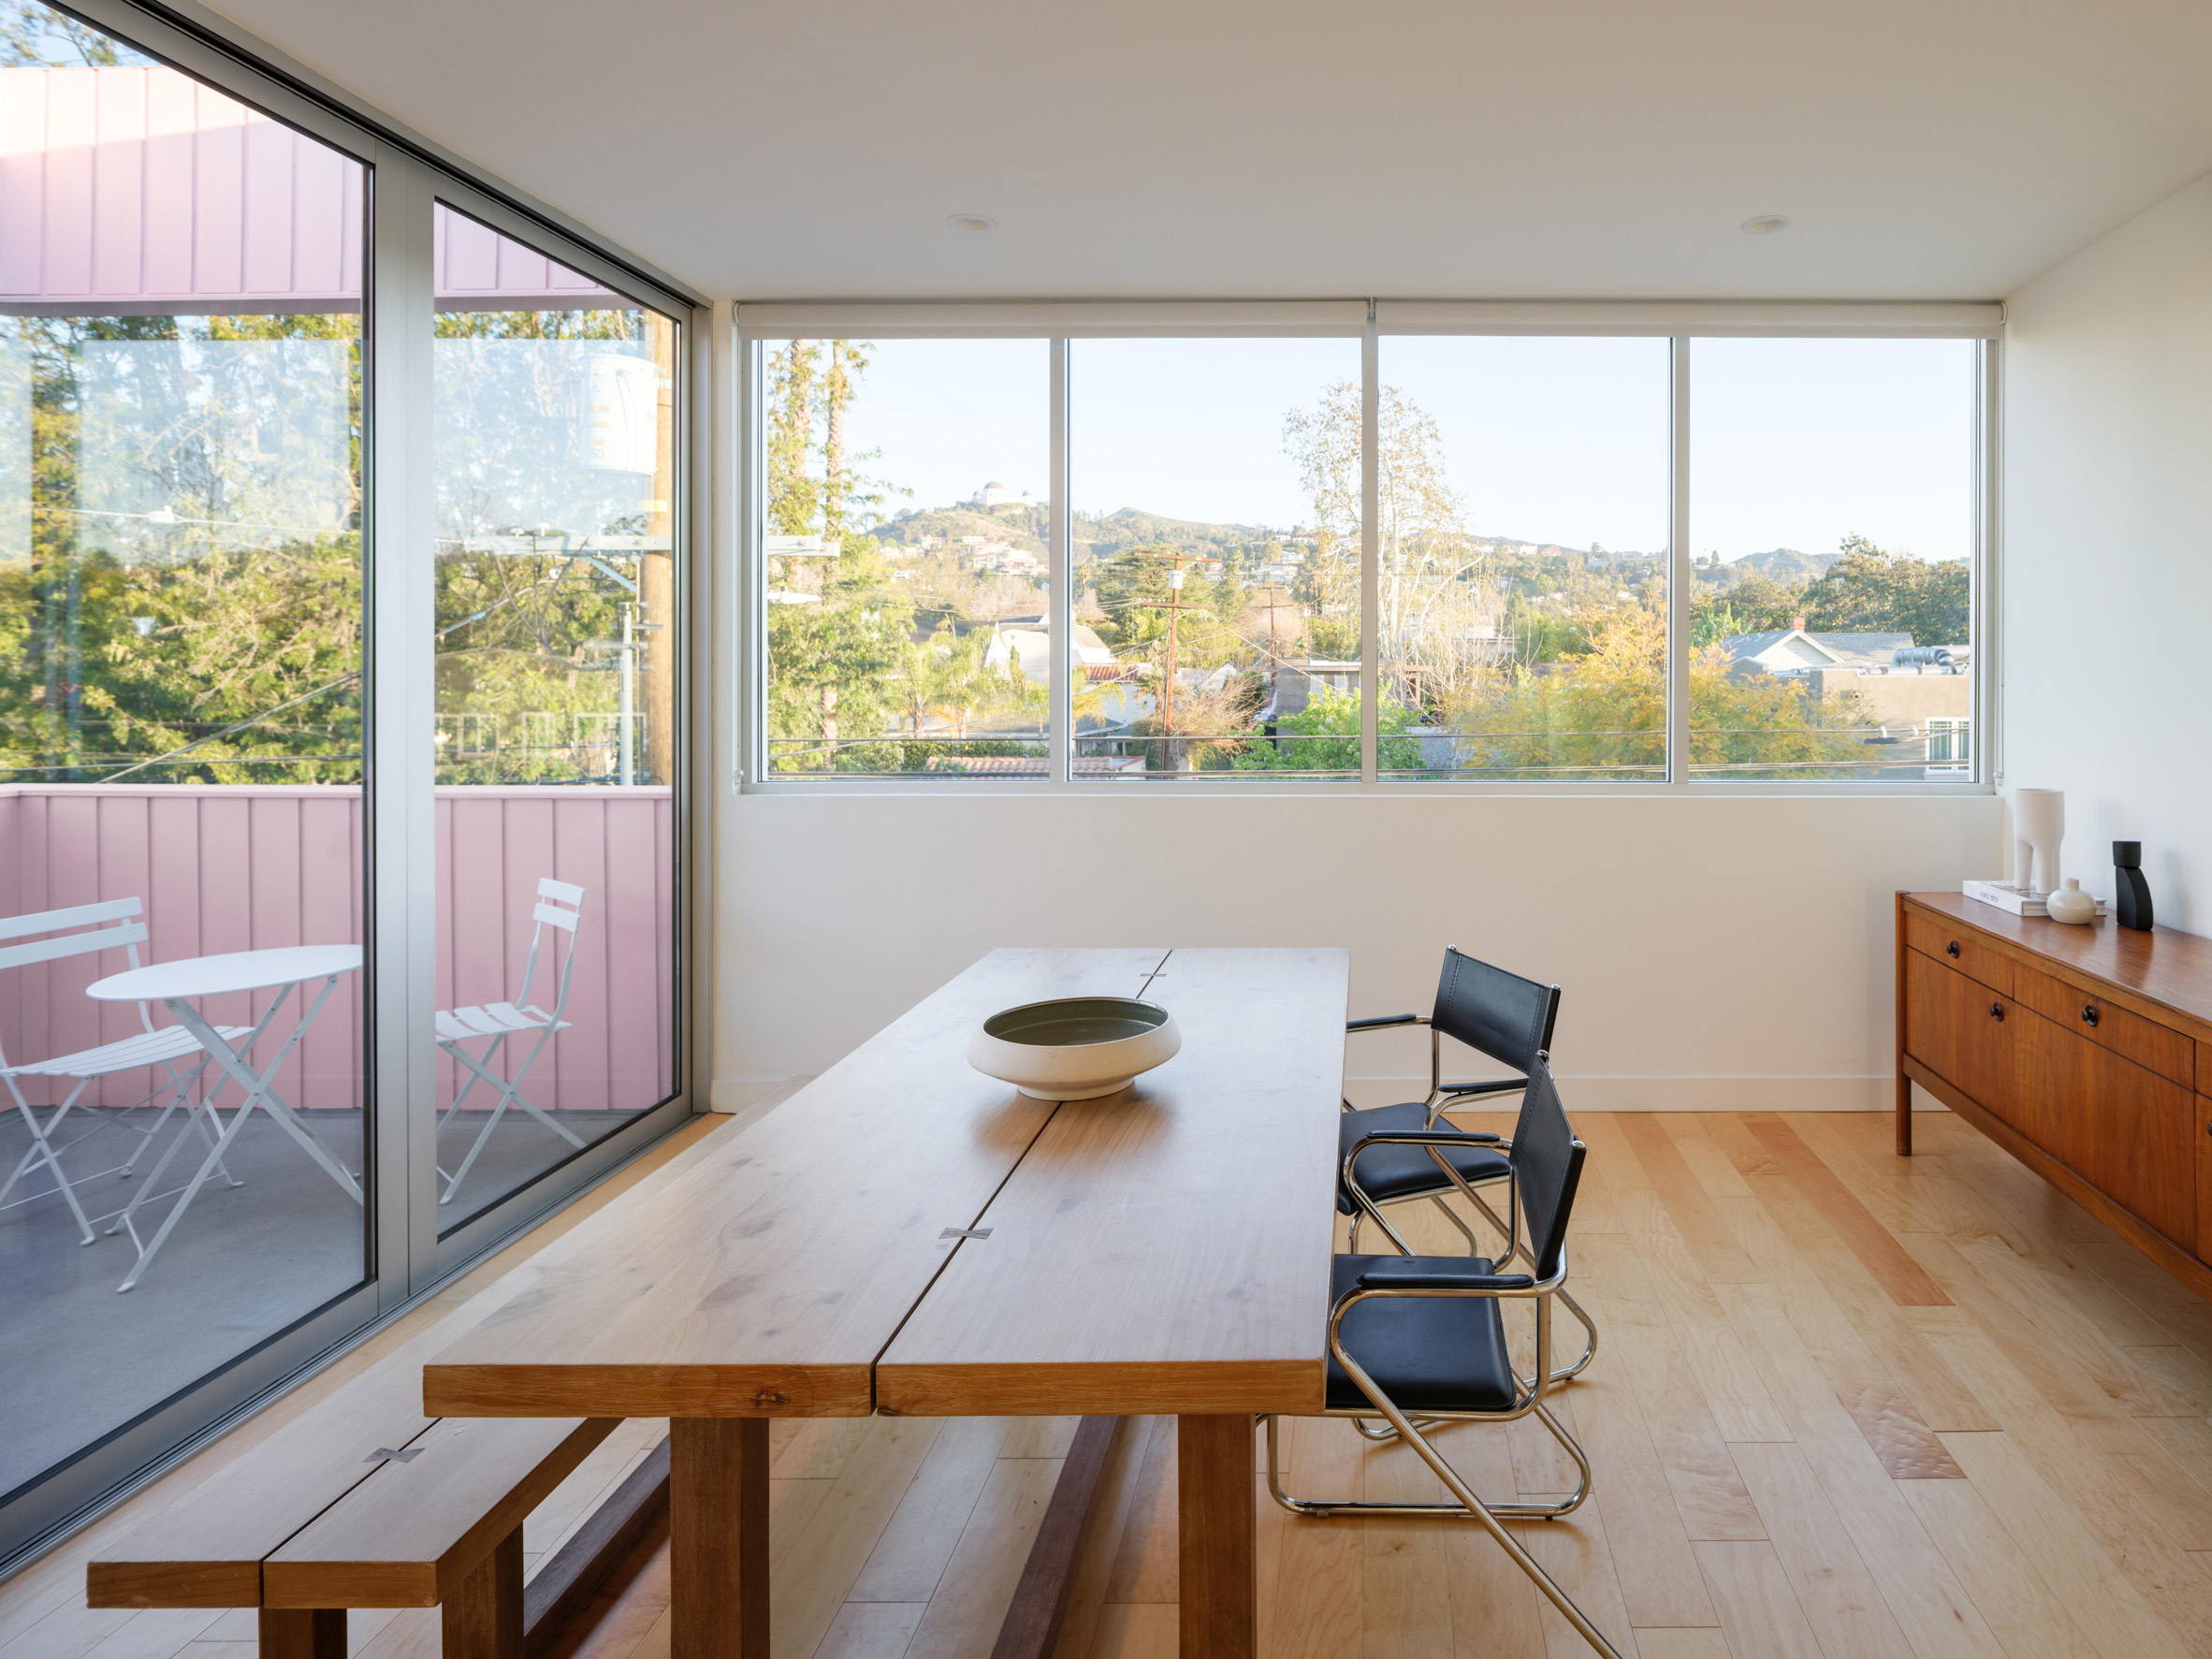 Dining room with wooden floors and sliding glass doors leading to a terrace with pink walls